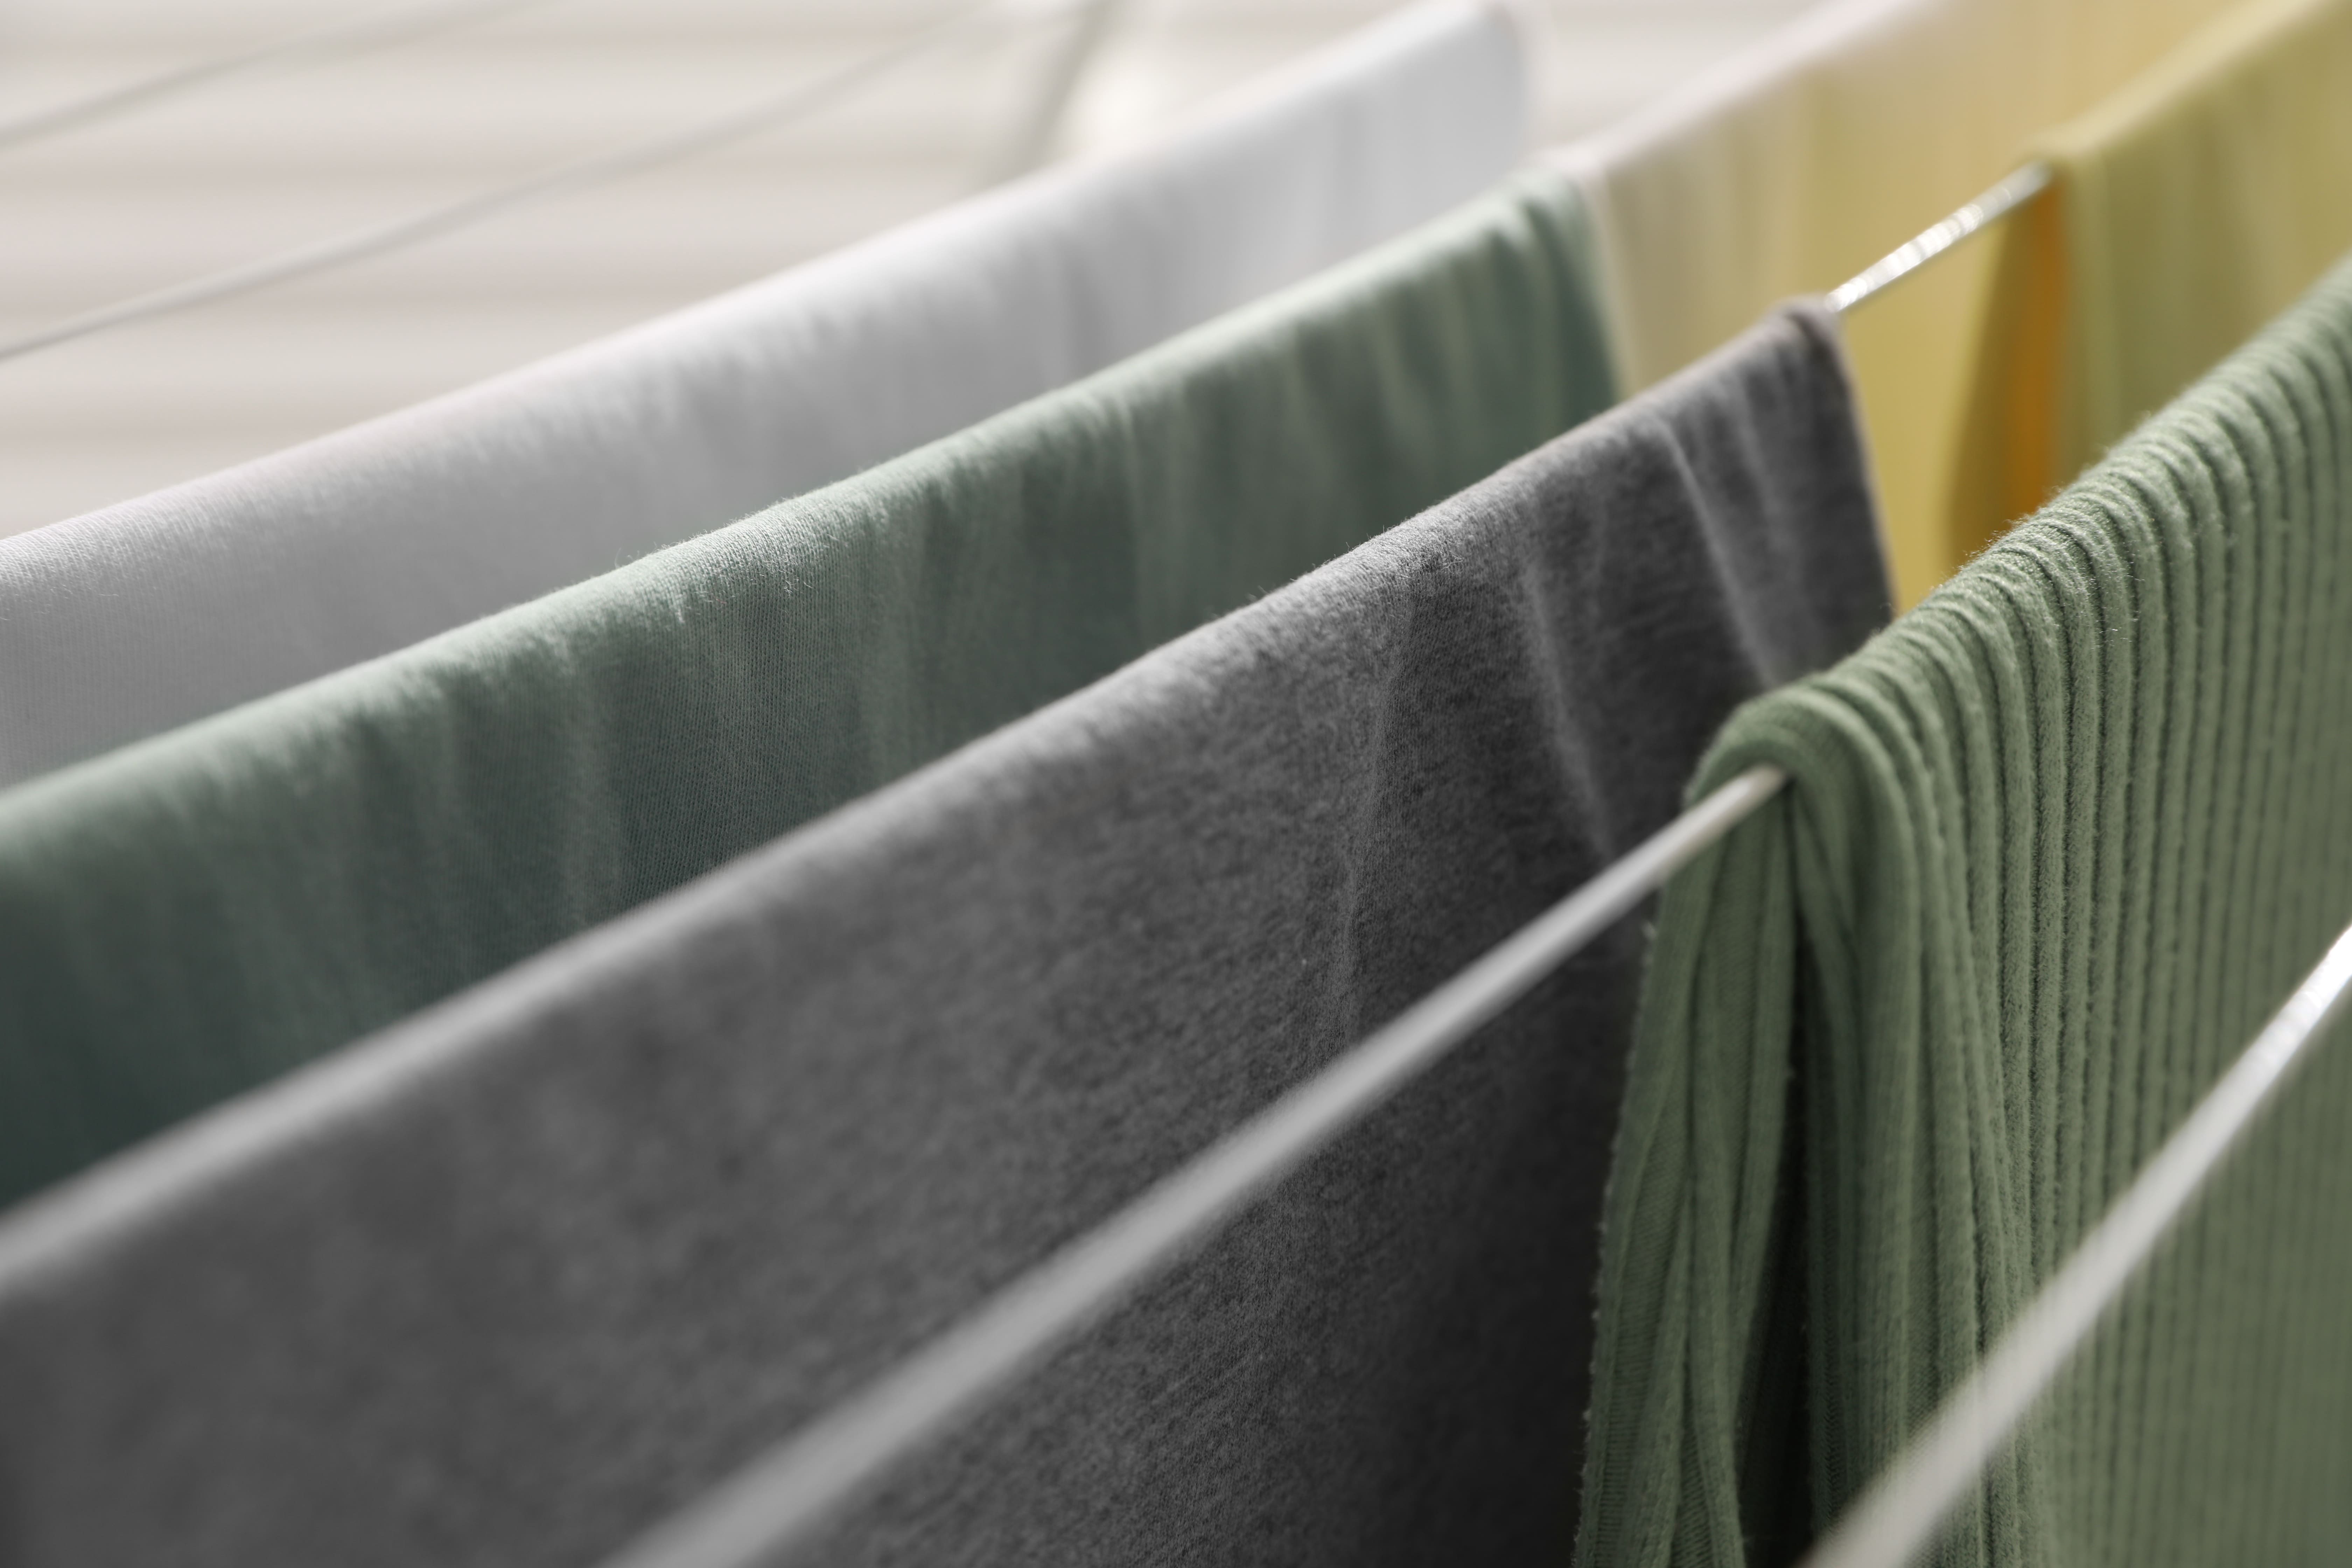 Washing and bedsheets drying on a collection of indoor washing lines